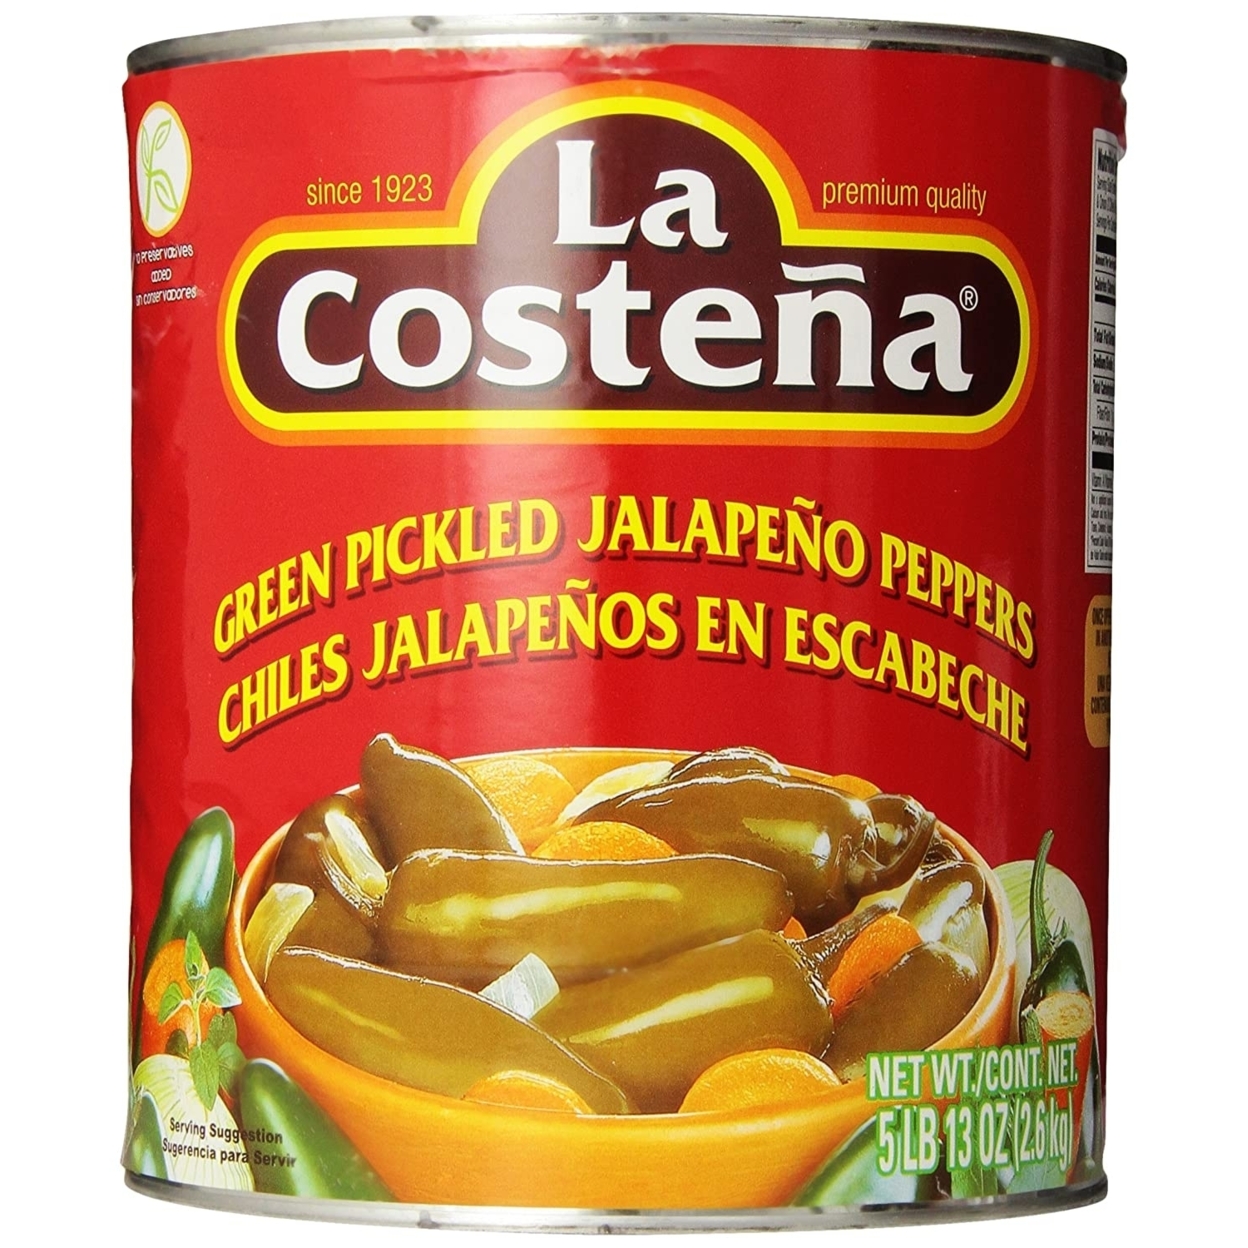 La Costena Jalapeno Peppers - 93 Ounce Can